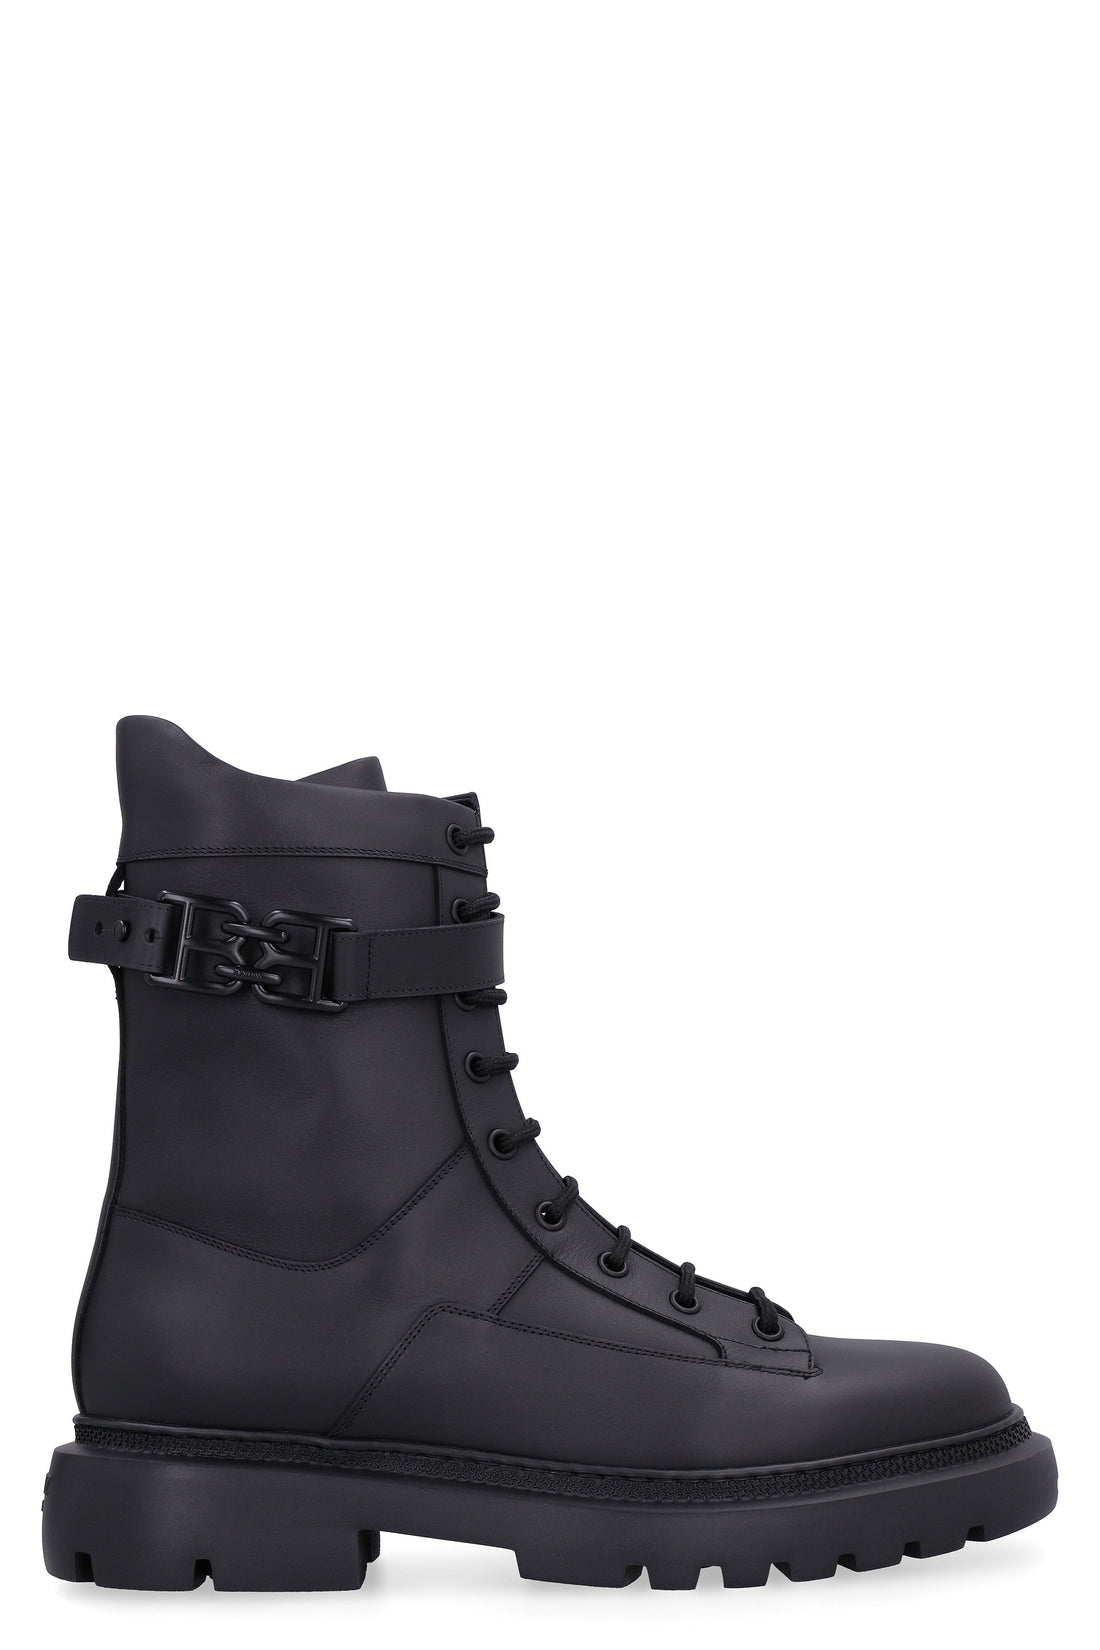 Bally-OUTLET-SALE-Gioele leather ankle boots-ARCHIVIST